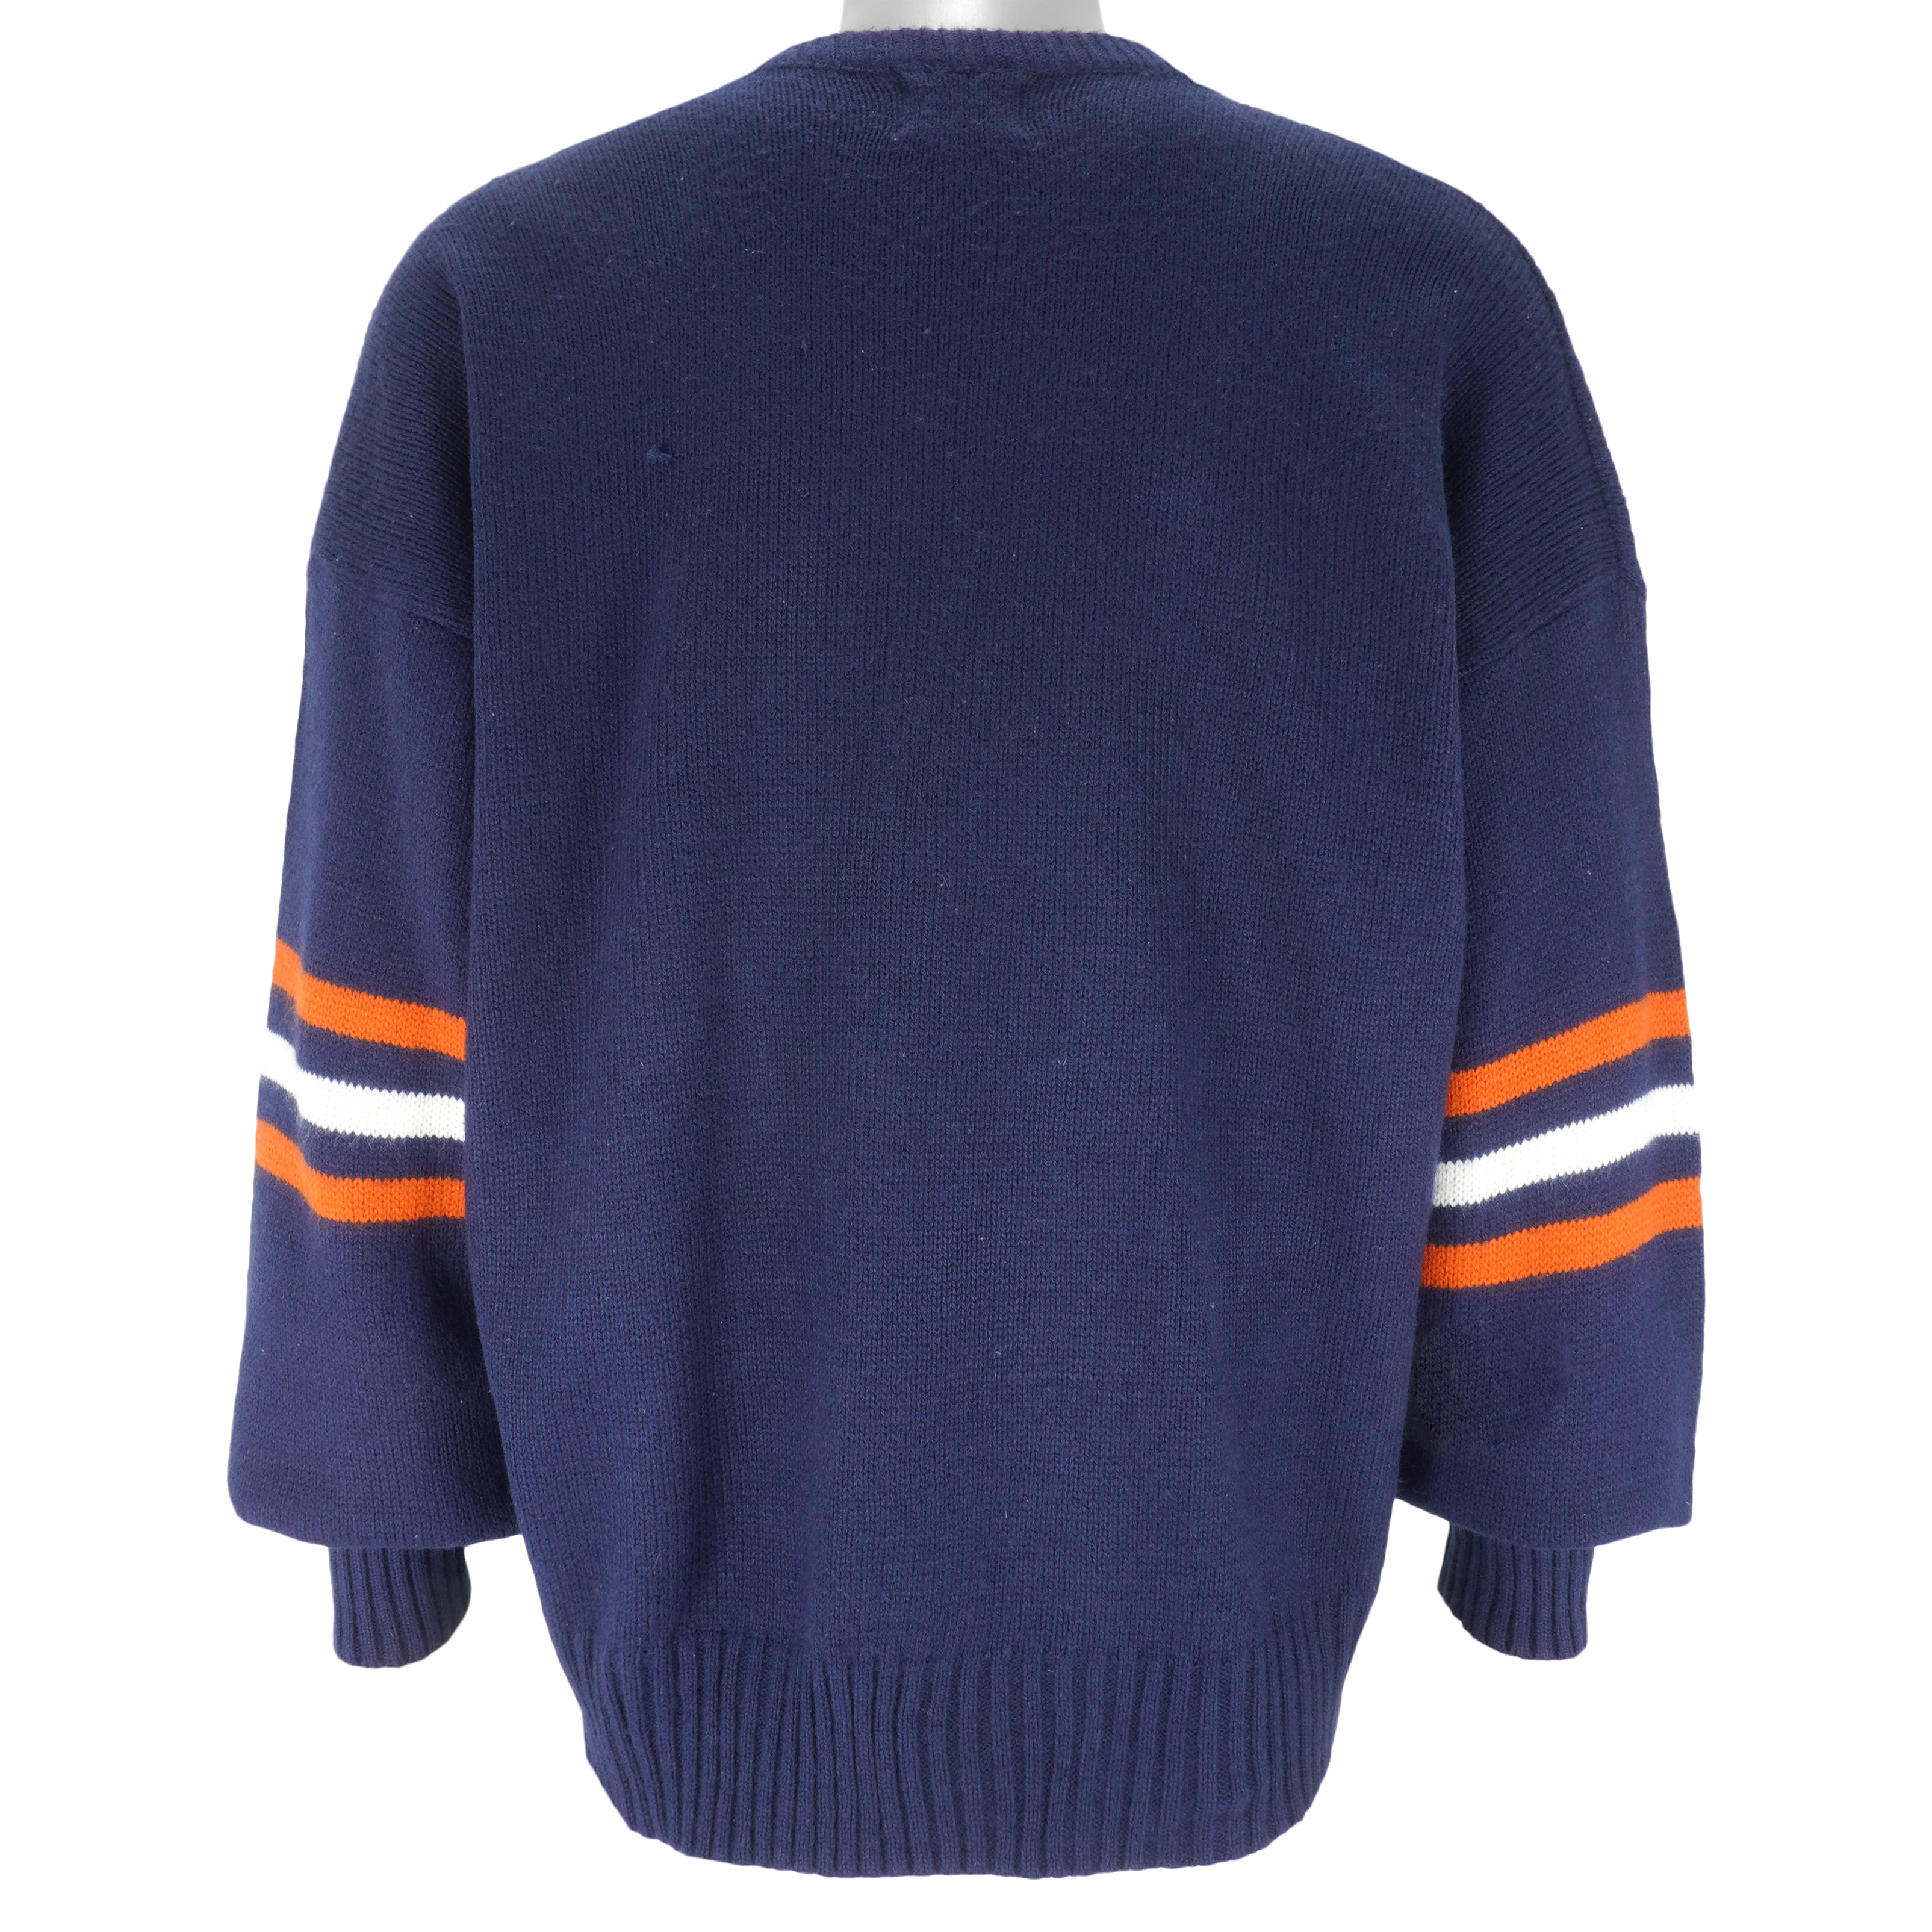 Vintage NFL (Cliff Engle) - Chicago Bears Crew Neck Knit Sweater 1980s Large